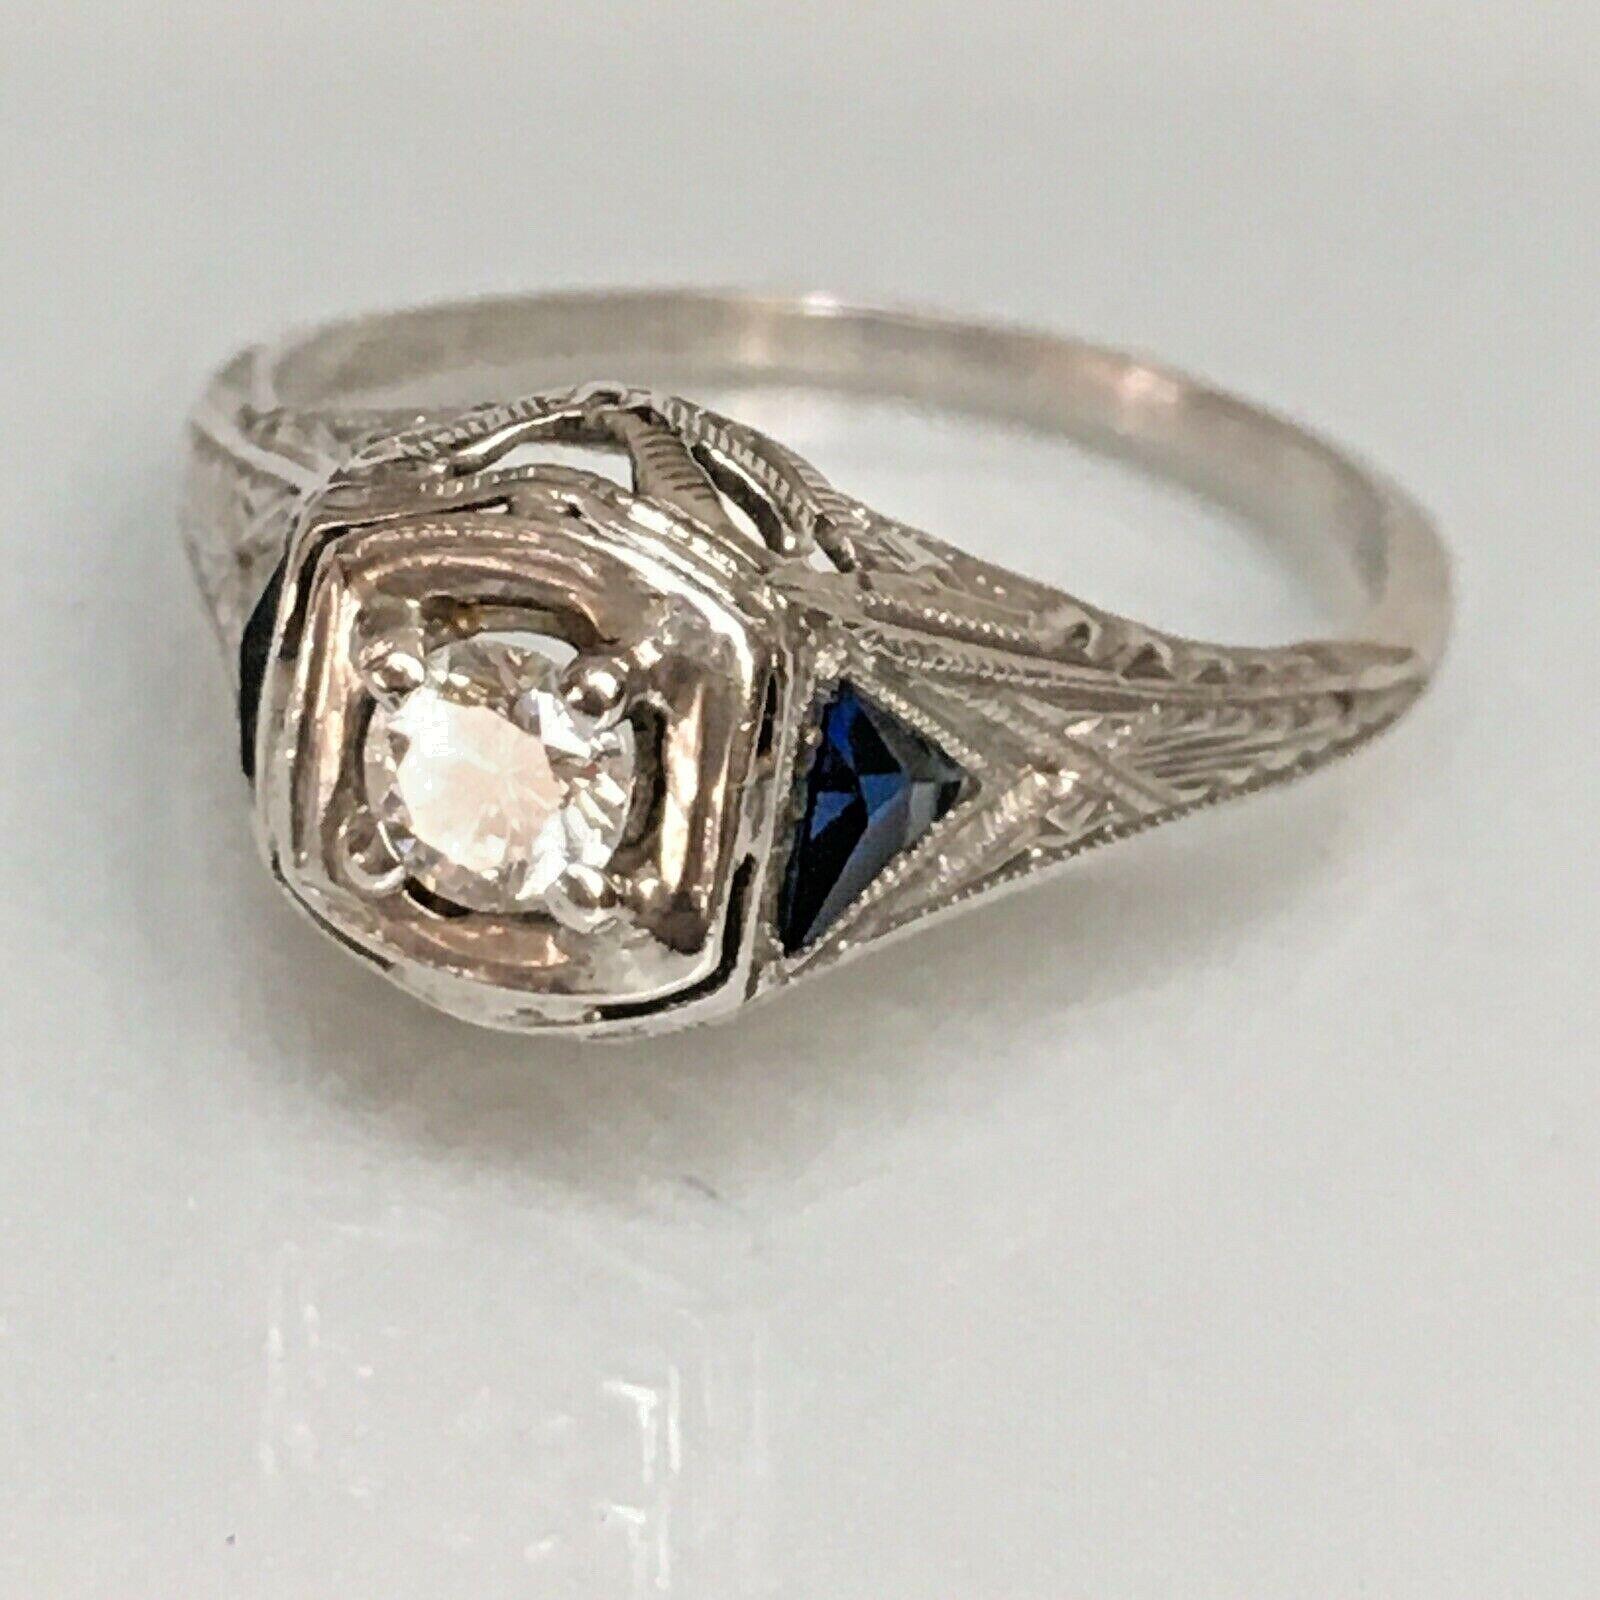 Certified 1920s Artdeco Platinum 1/6 Carat Diamond Sapphire Ring American
Filigree Work
Finger Size 4.75
Certified
In excellent condition considering the age, certified, see pictures

Authentic American Antique 100 Yrs old
Art Deco Platinum Diamond